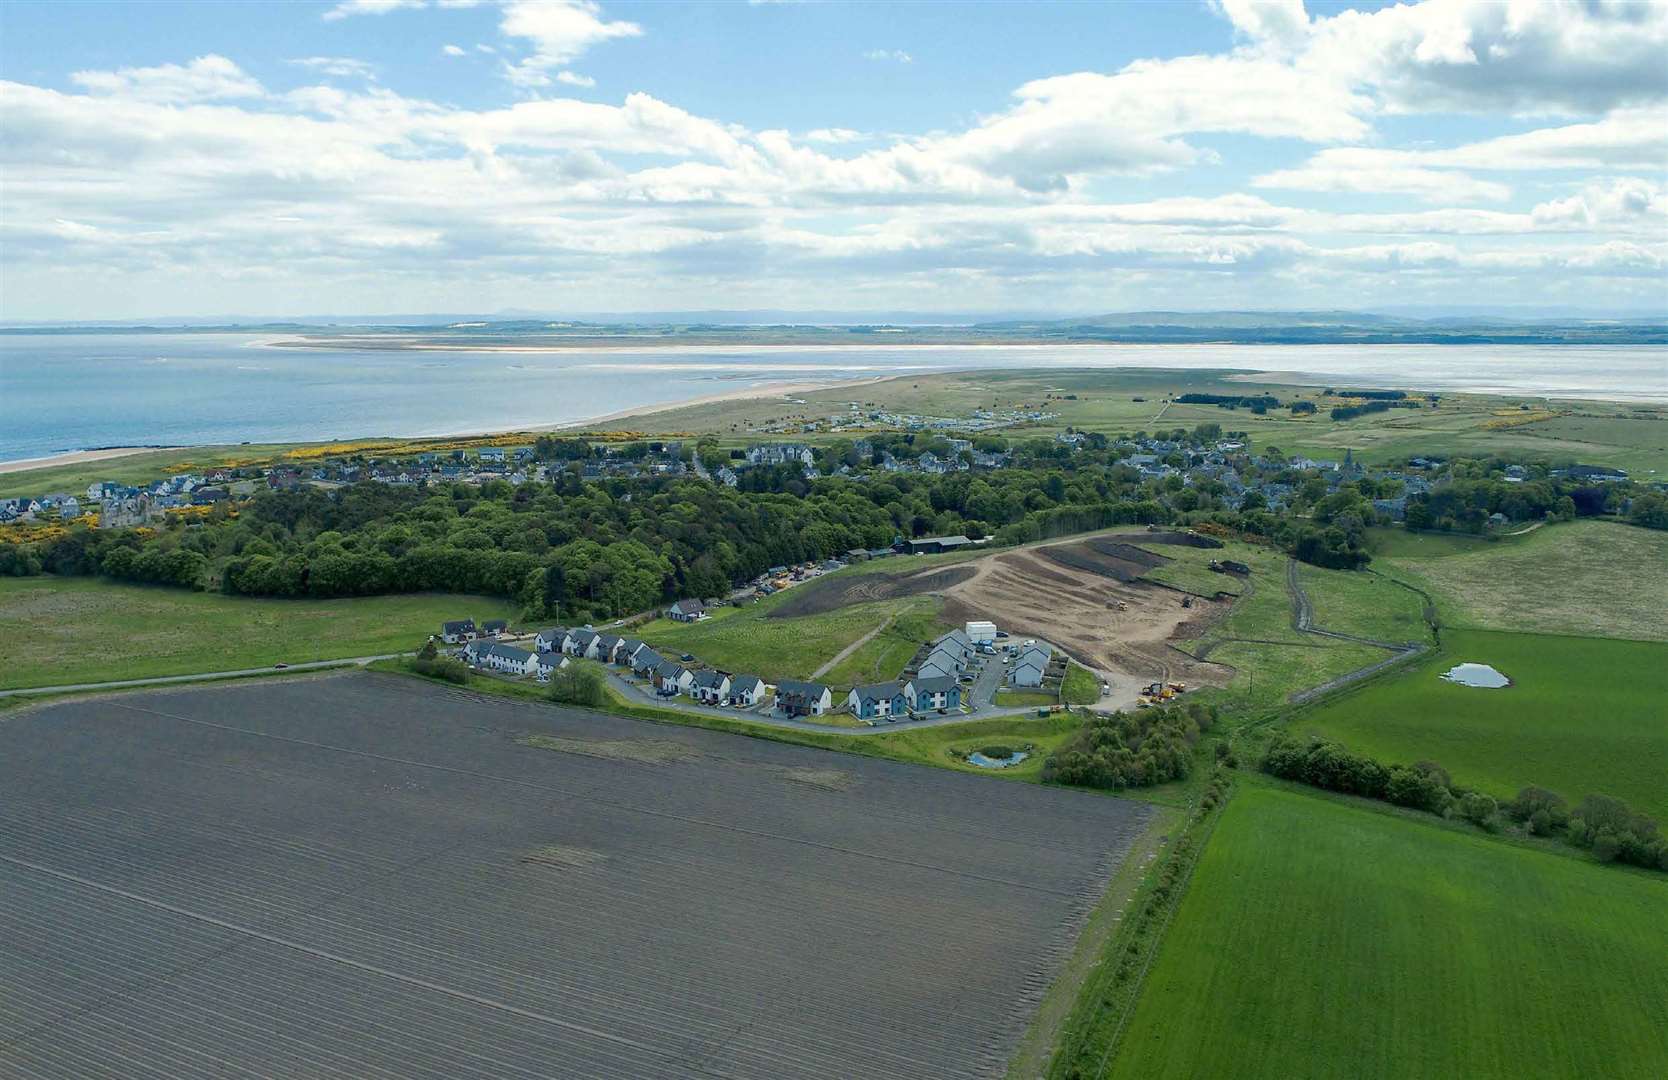 Springfield Properties plans to build 112 homes on the site in Dornoch.